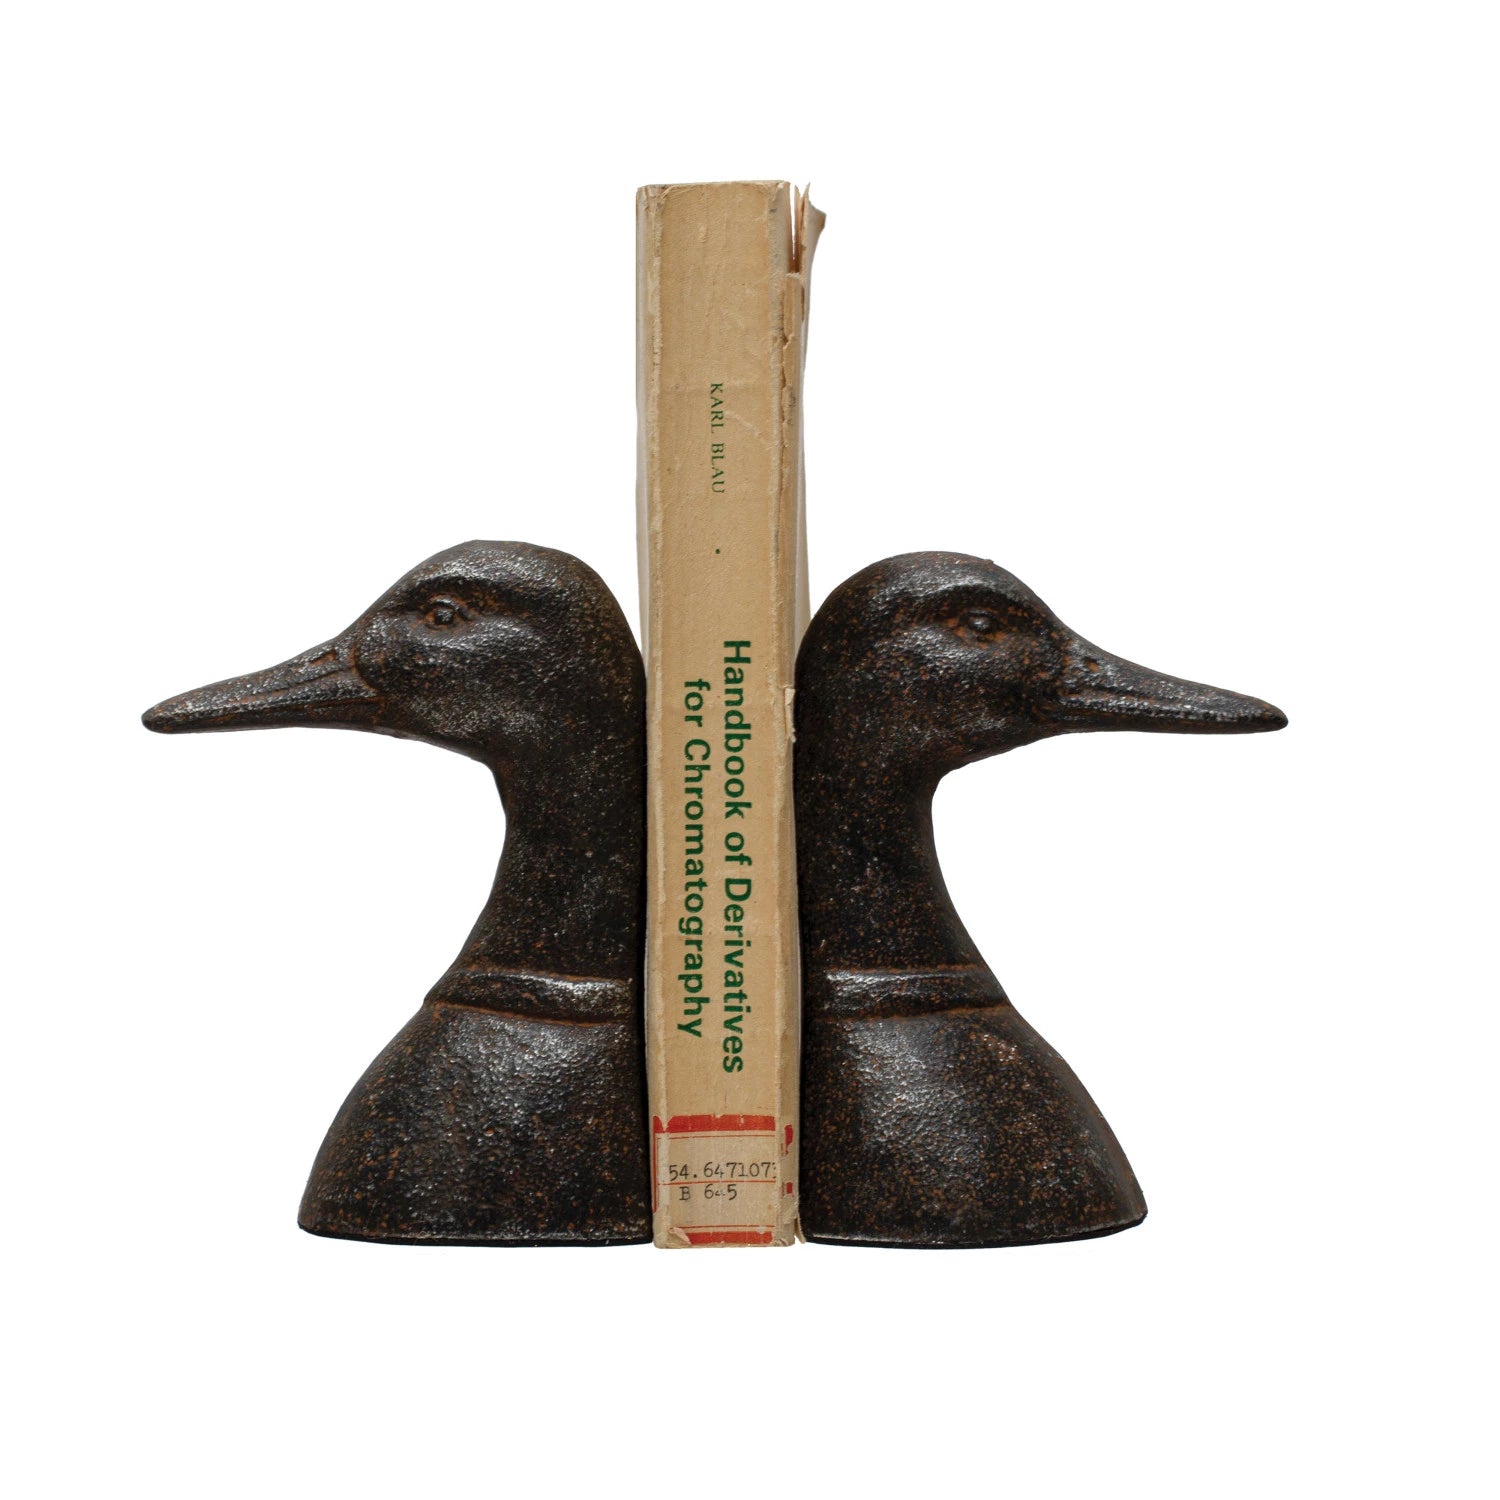 Duckhead Bookends, The Feathered Farmhouse